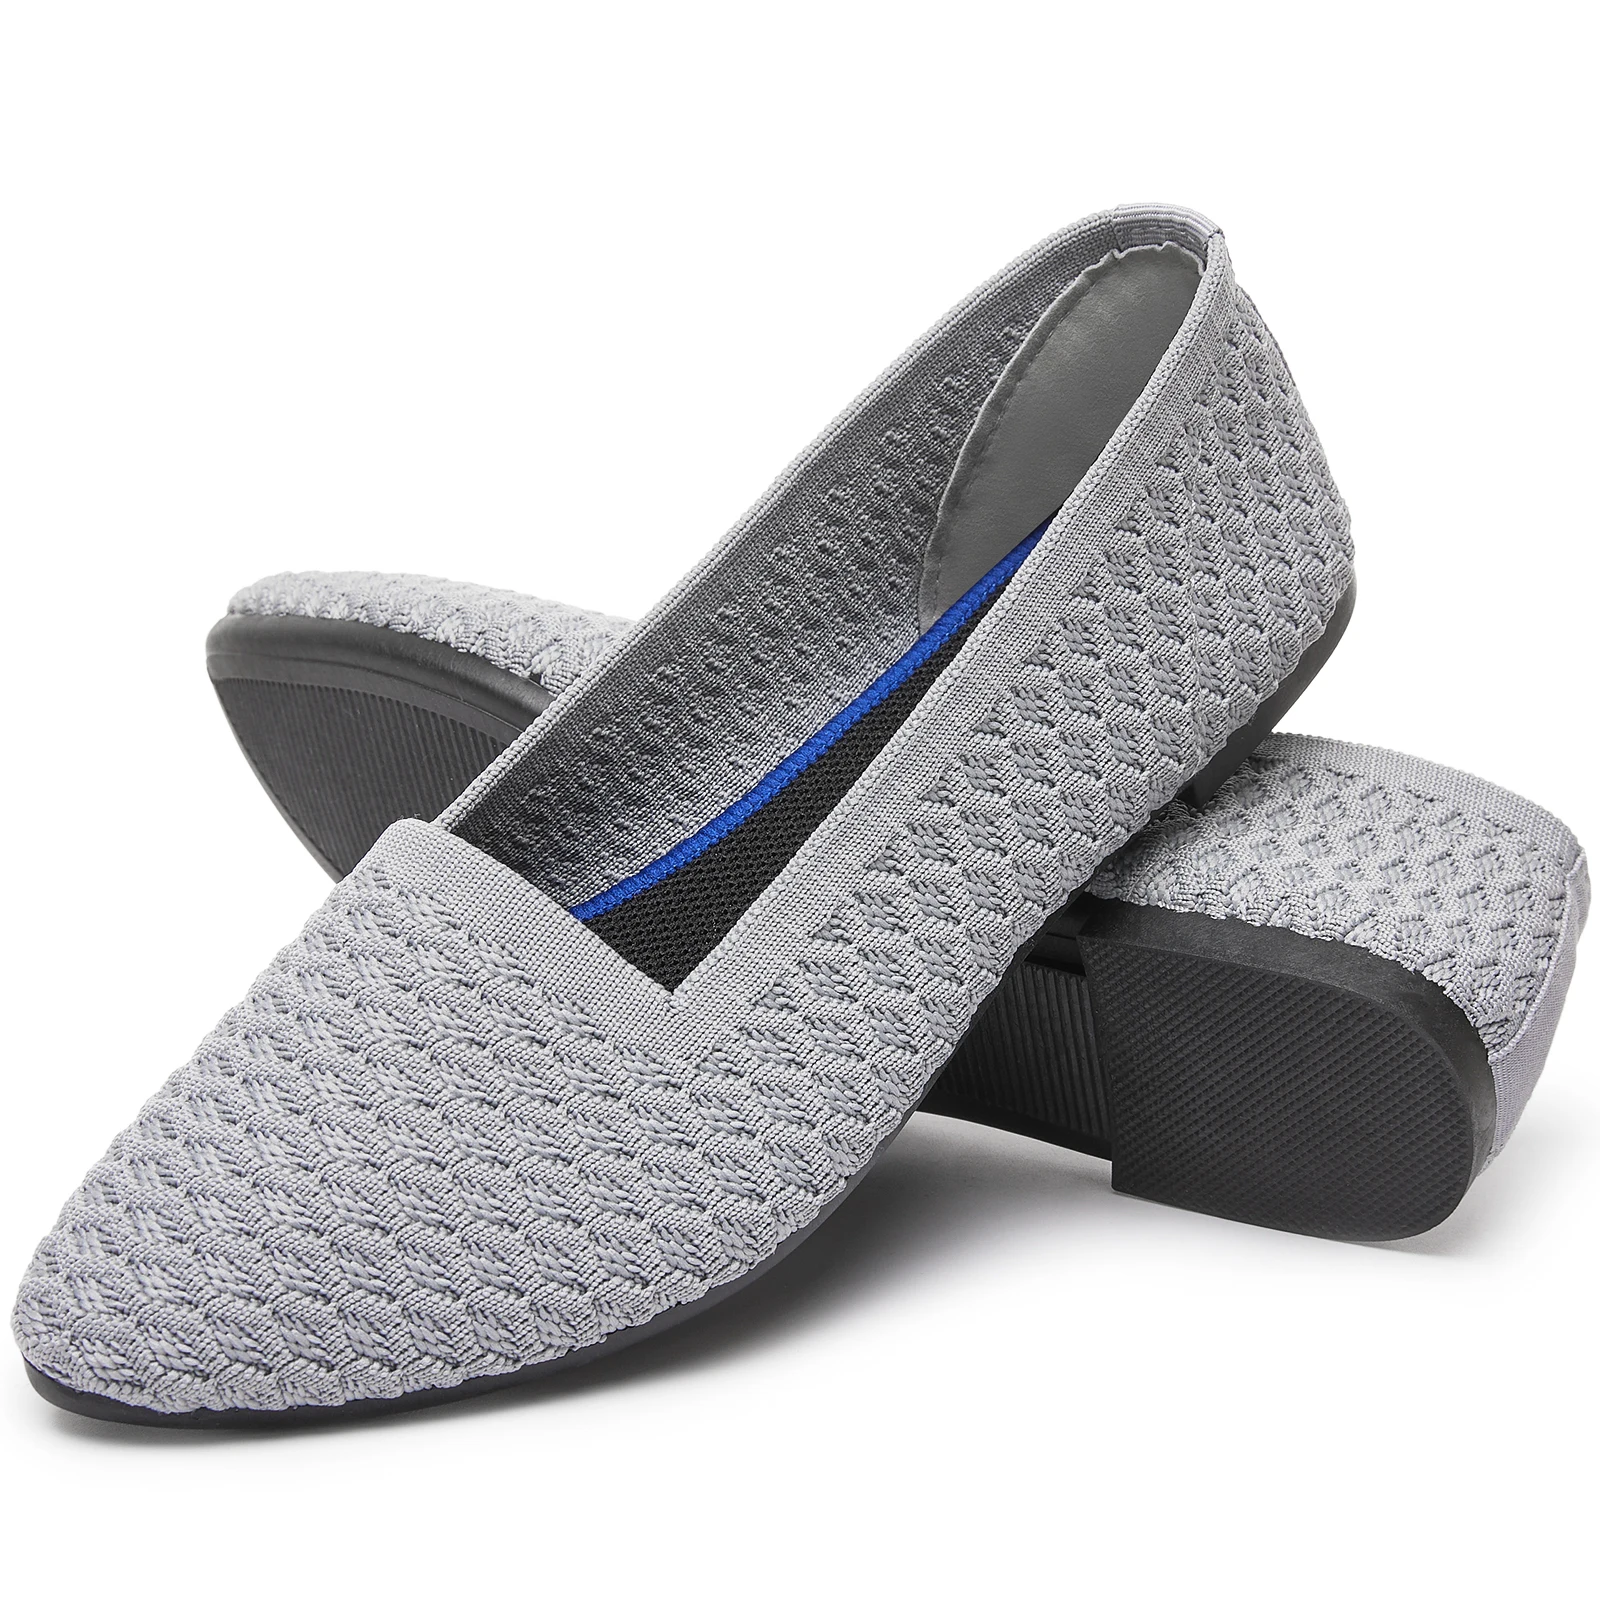 Fashion durable fabric breathable women's shoes blank shoes can be customized wholesale flat shoes